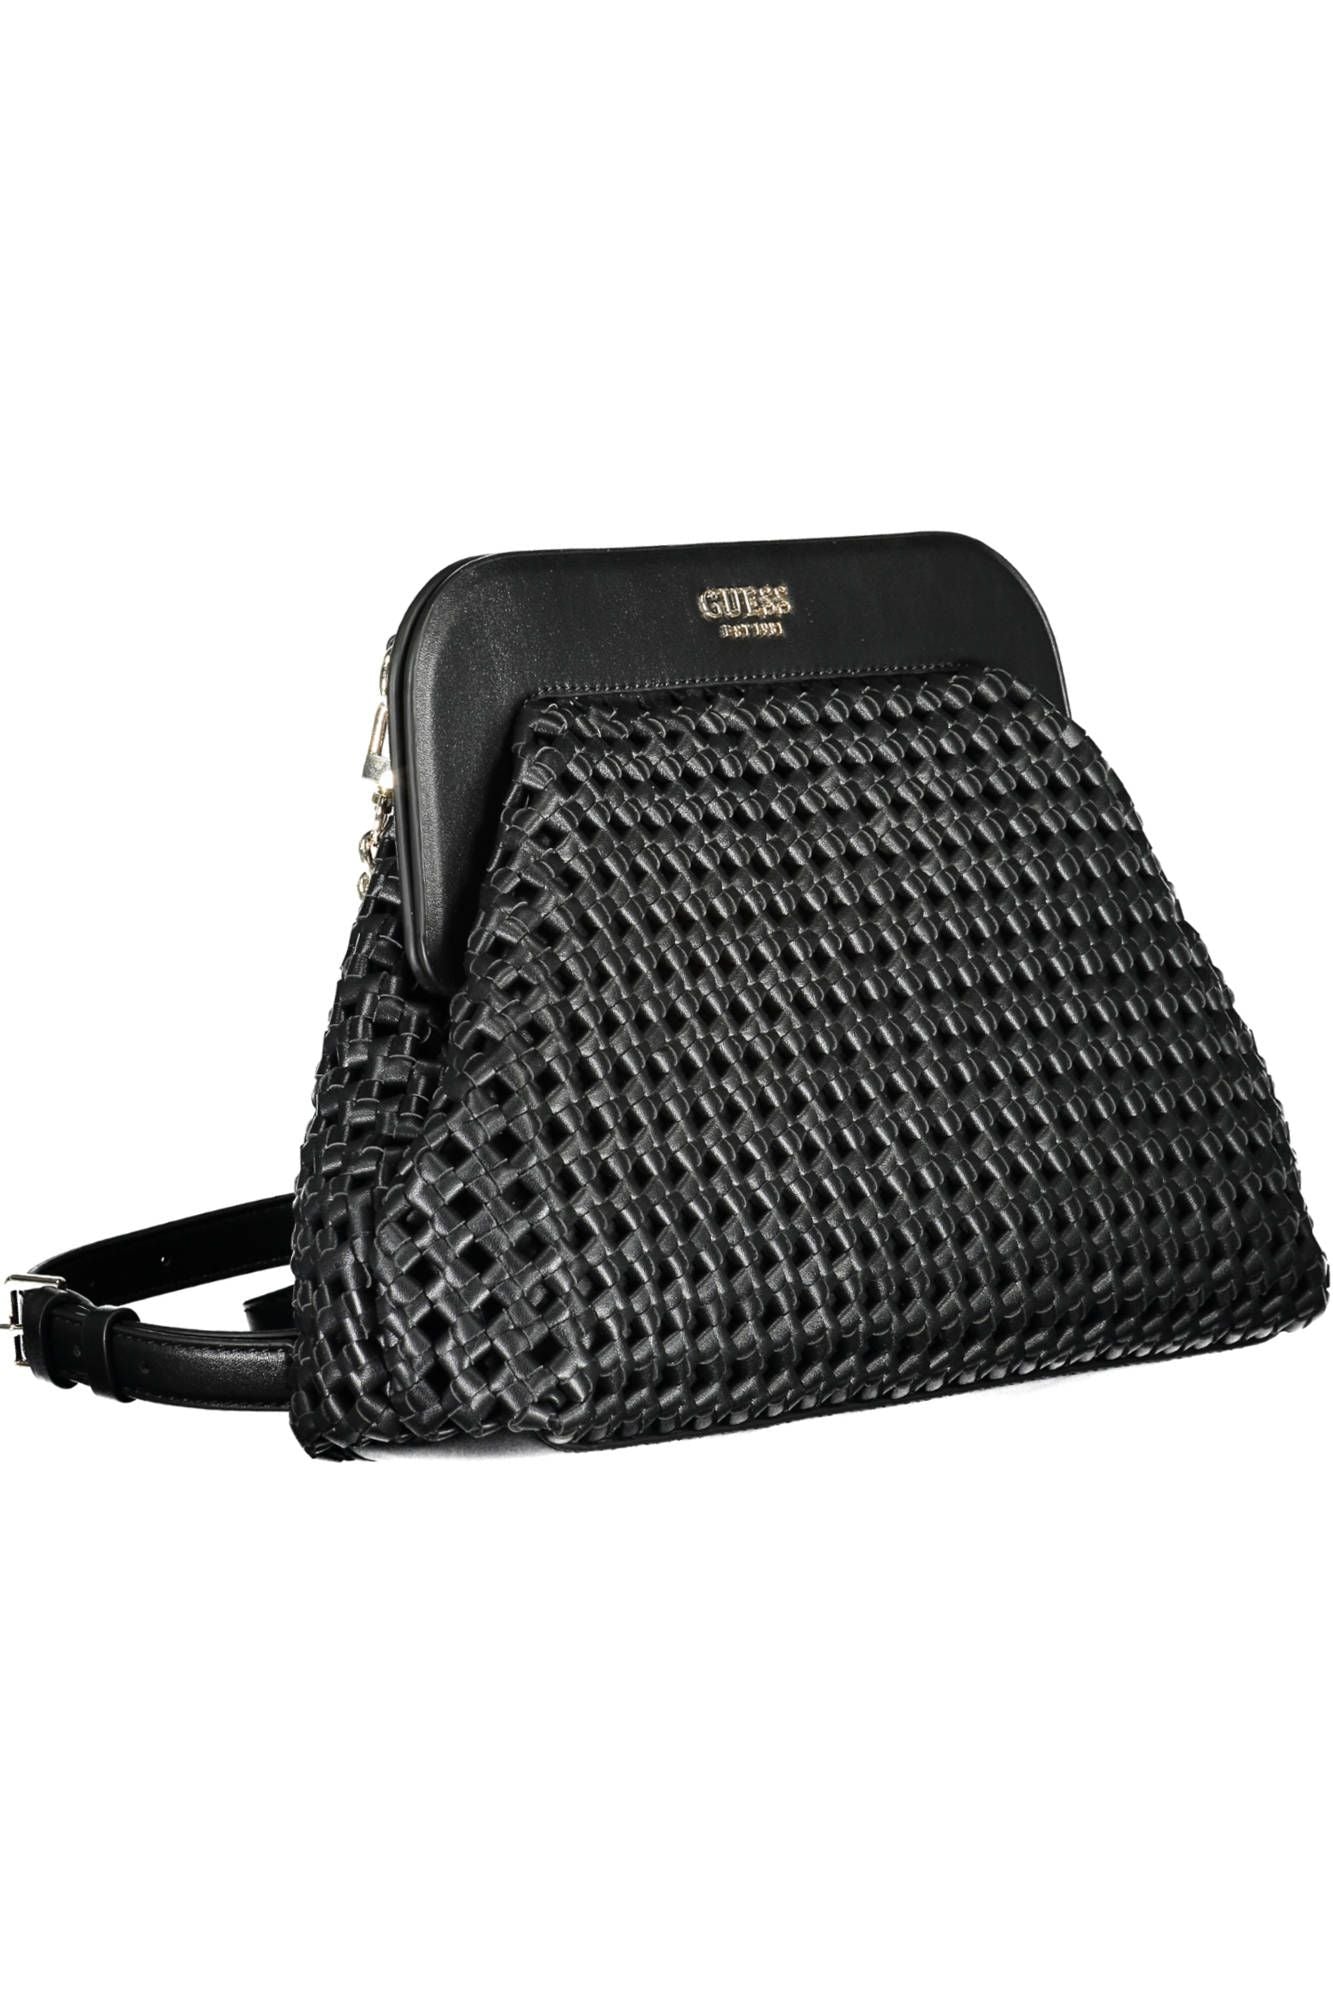 Guess Jeans Chic Black Polyurethane Satchel with Logo Detail